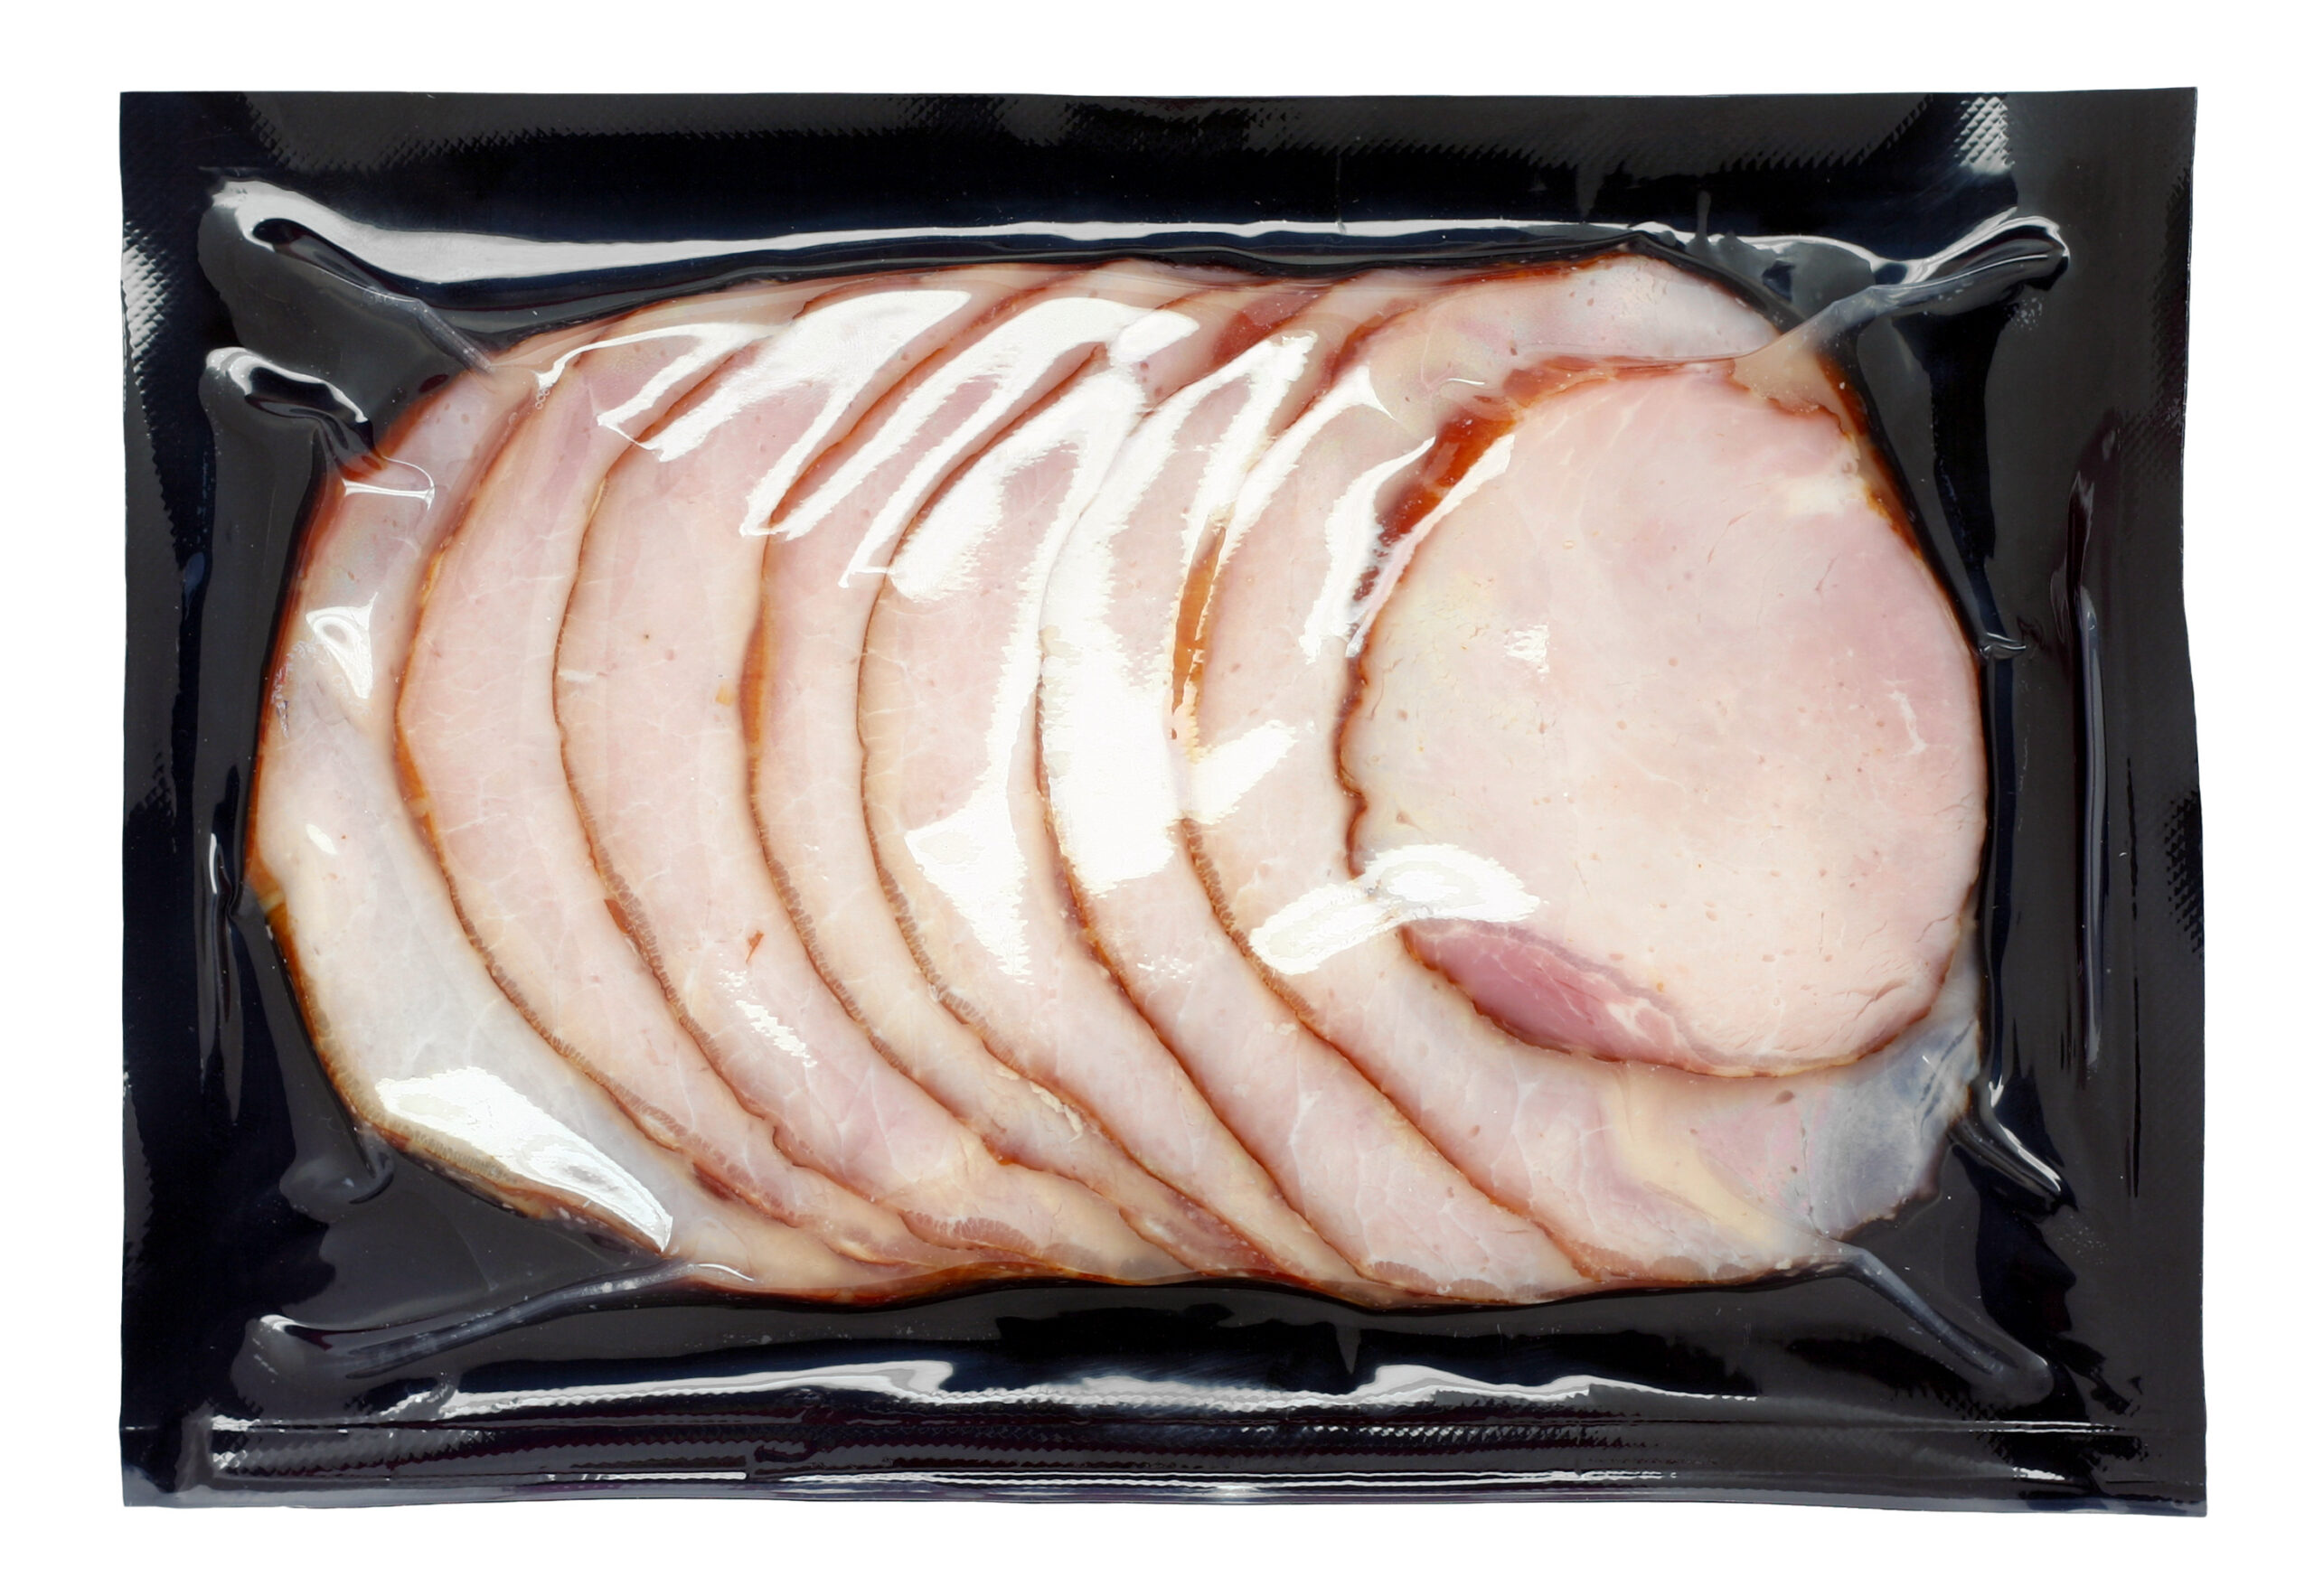 "A package of Canadian bacon, isolated."